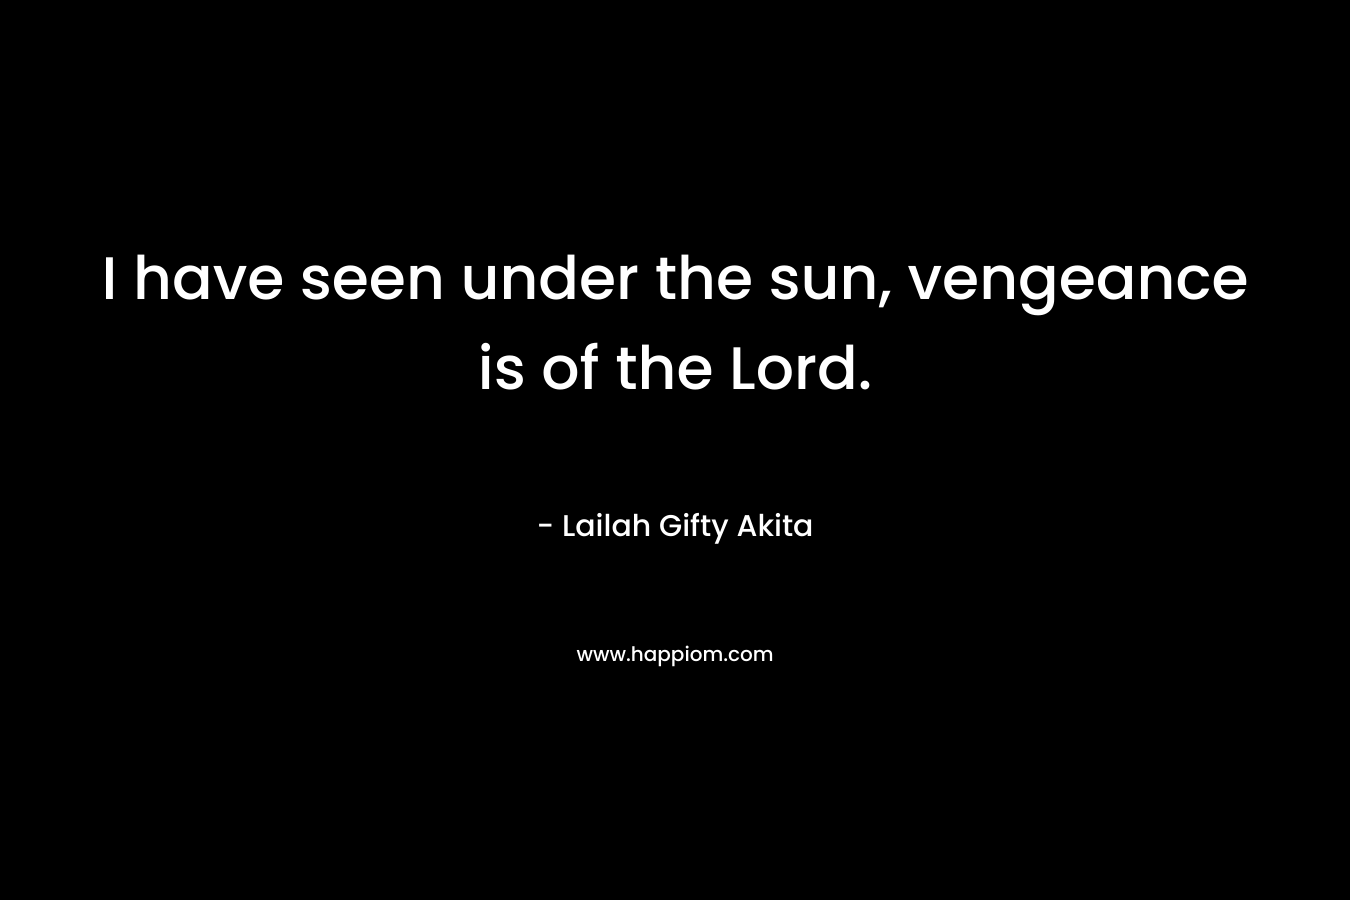 I have seen under the sun, vengeance is of the Lord.